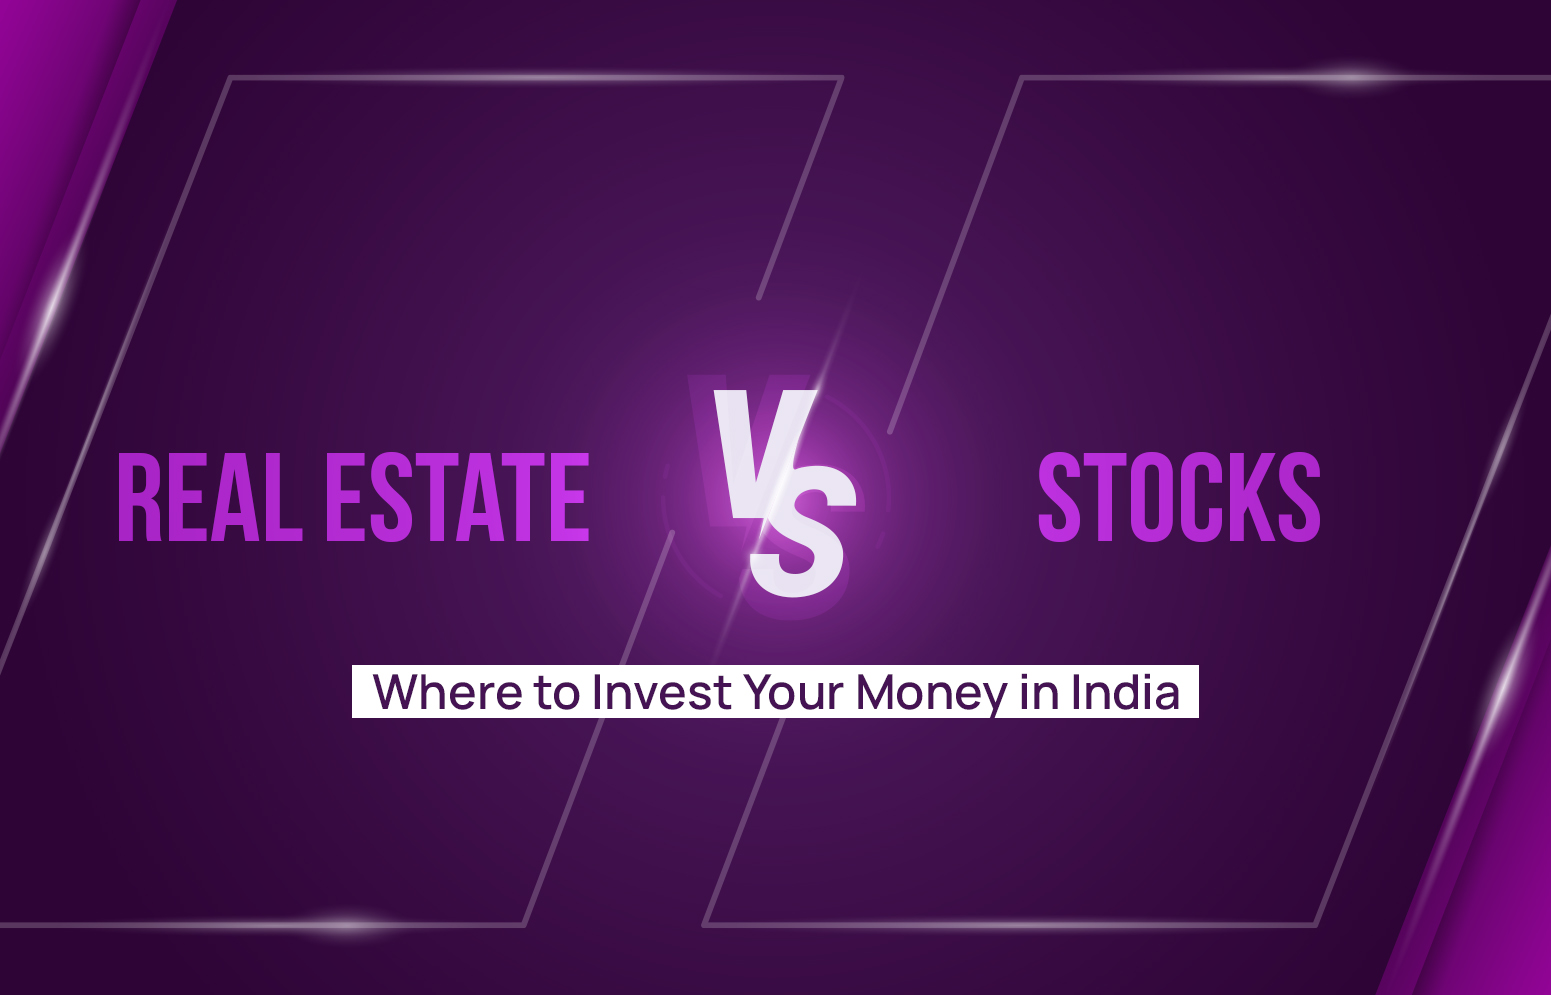 Real Estate vs. Stocks – Where to Invest Your Money in India